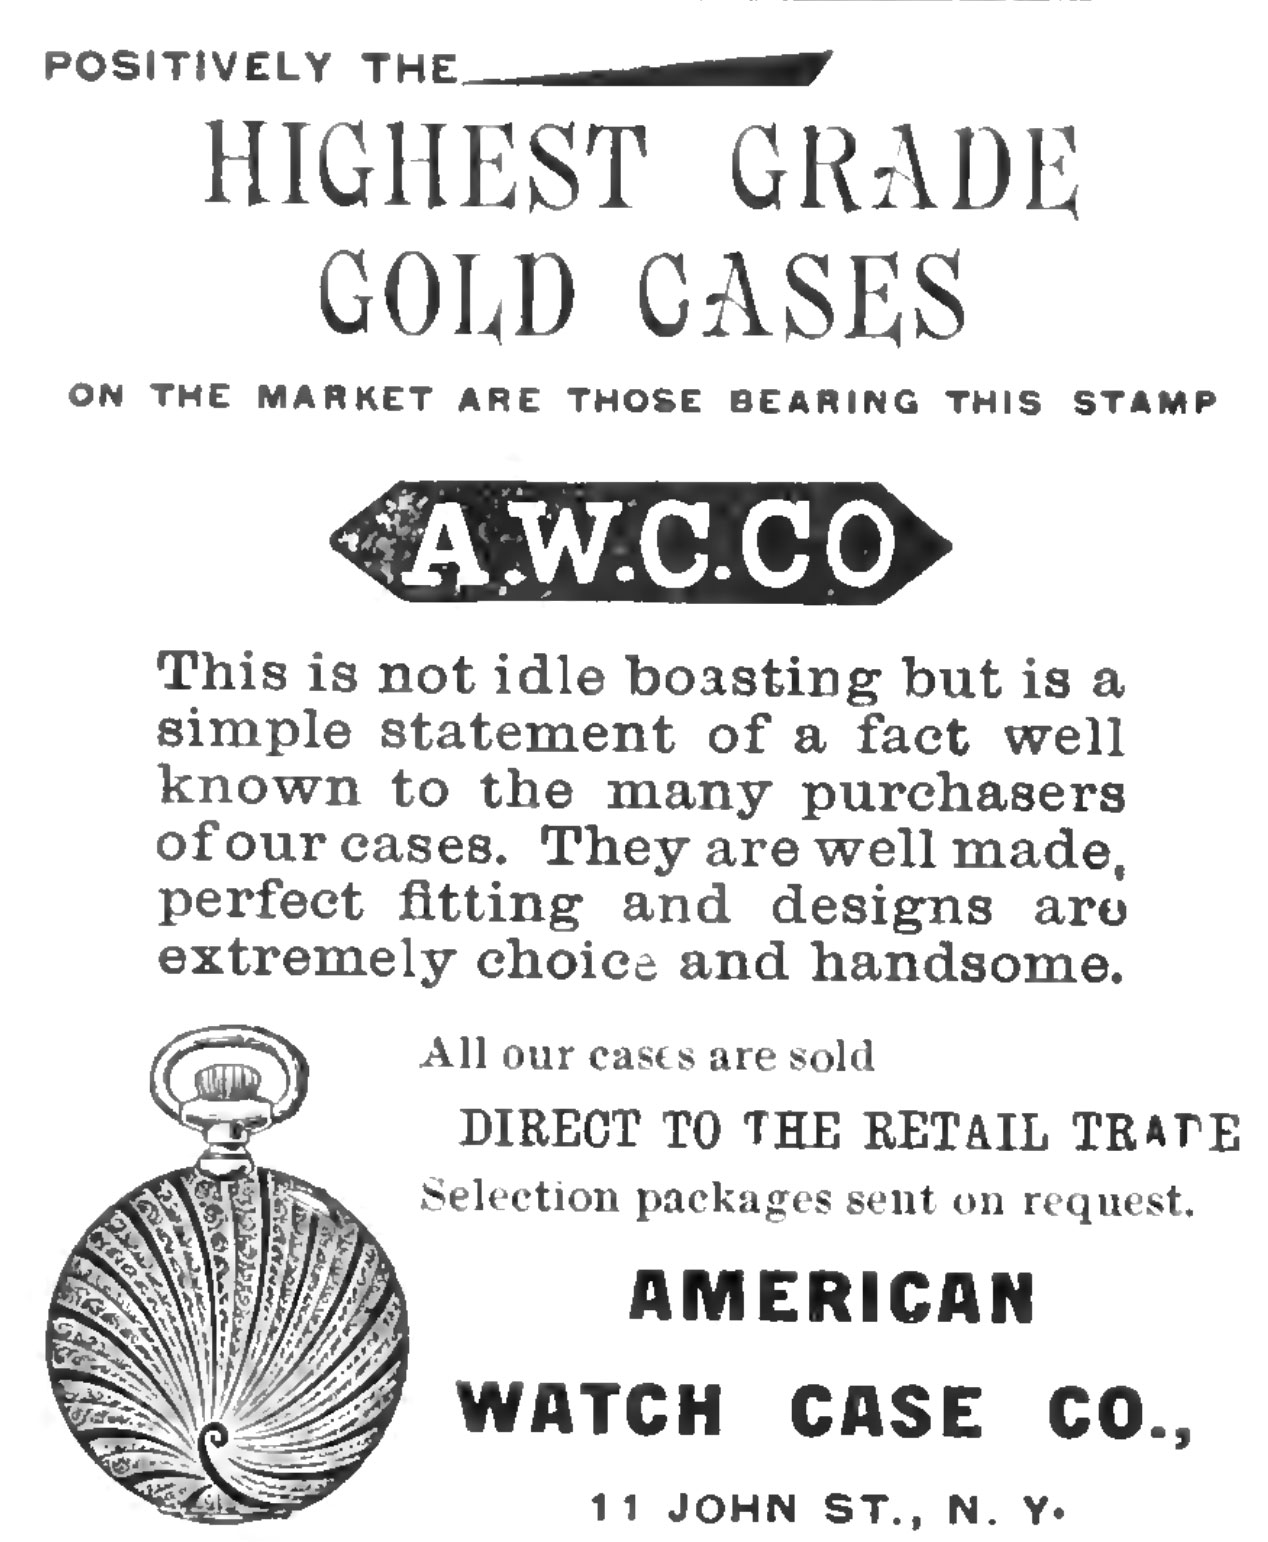 American Watch Case Co. Image